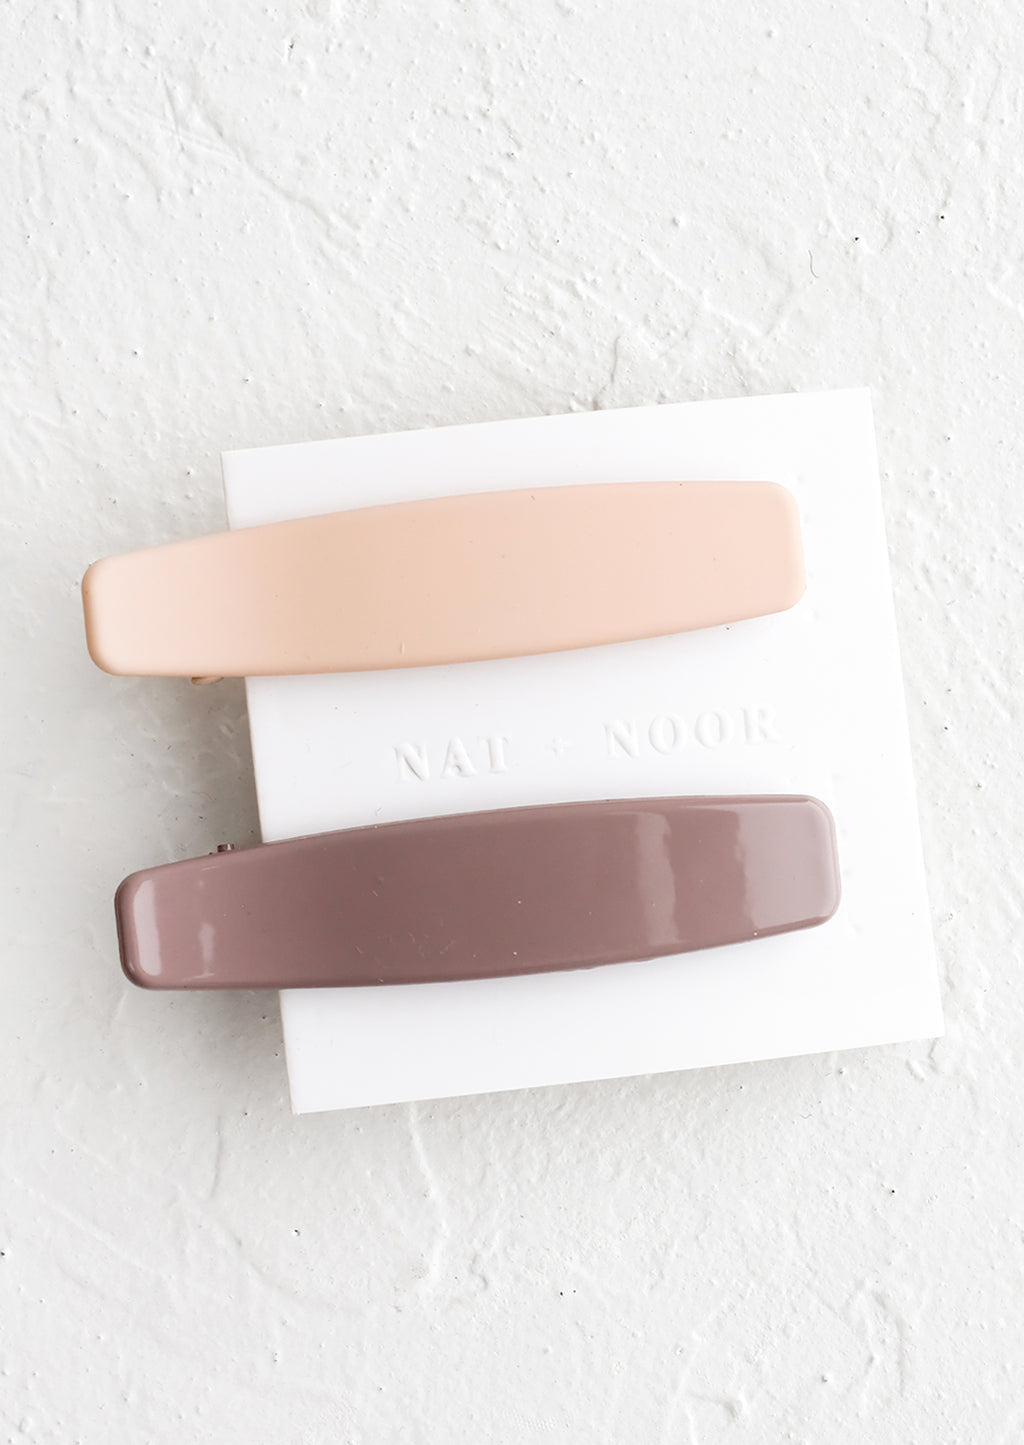 Nude / Mauve: A pair of hair clips with one nude and one mauve.